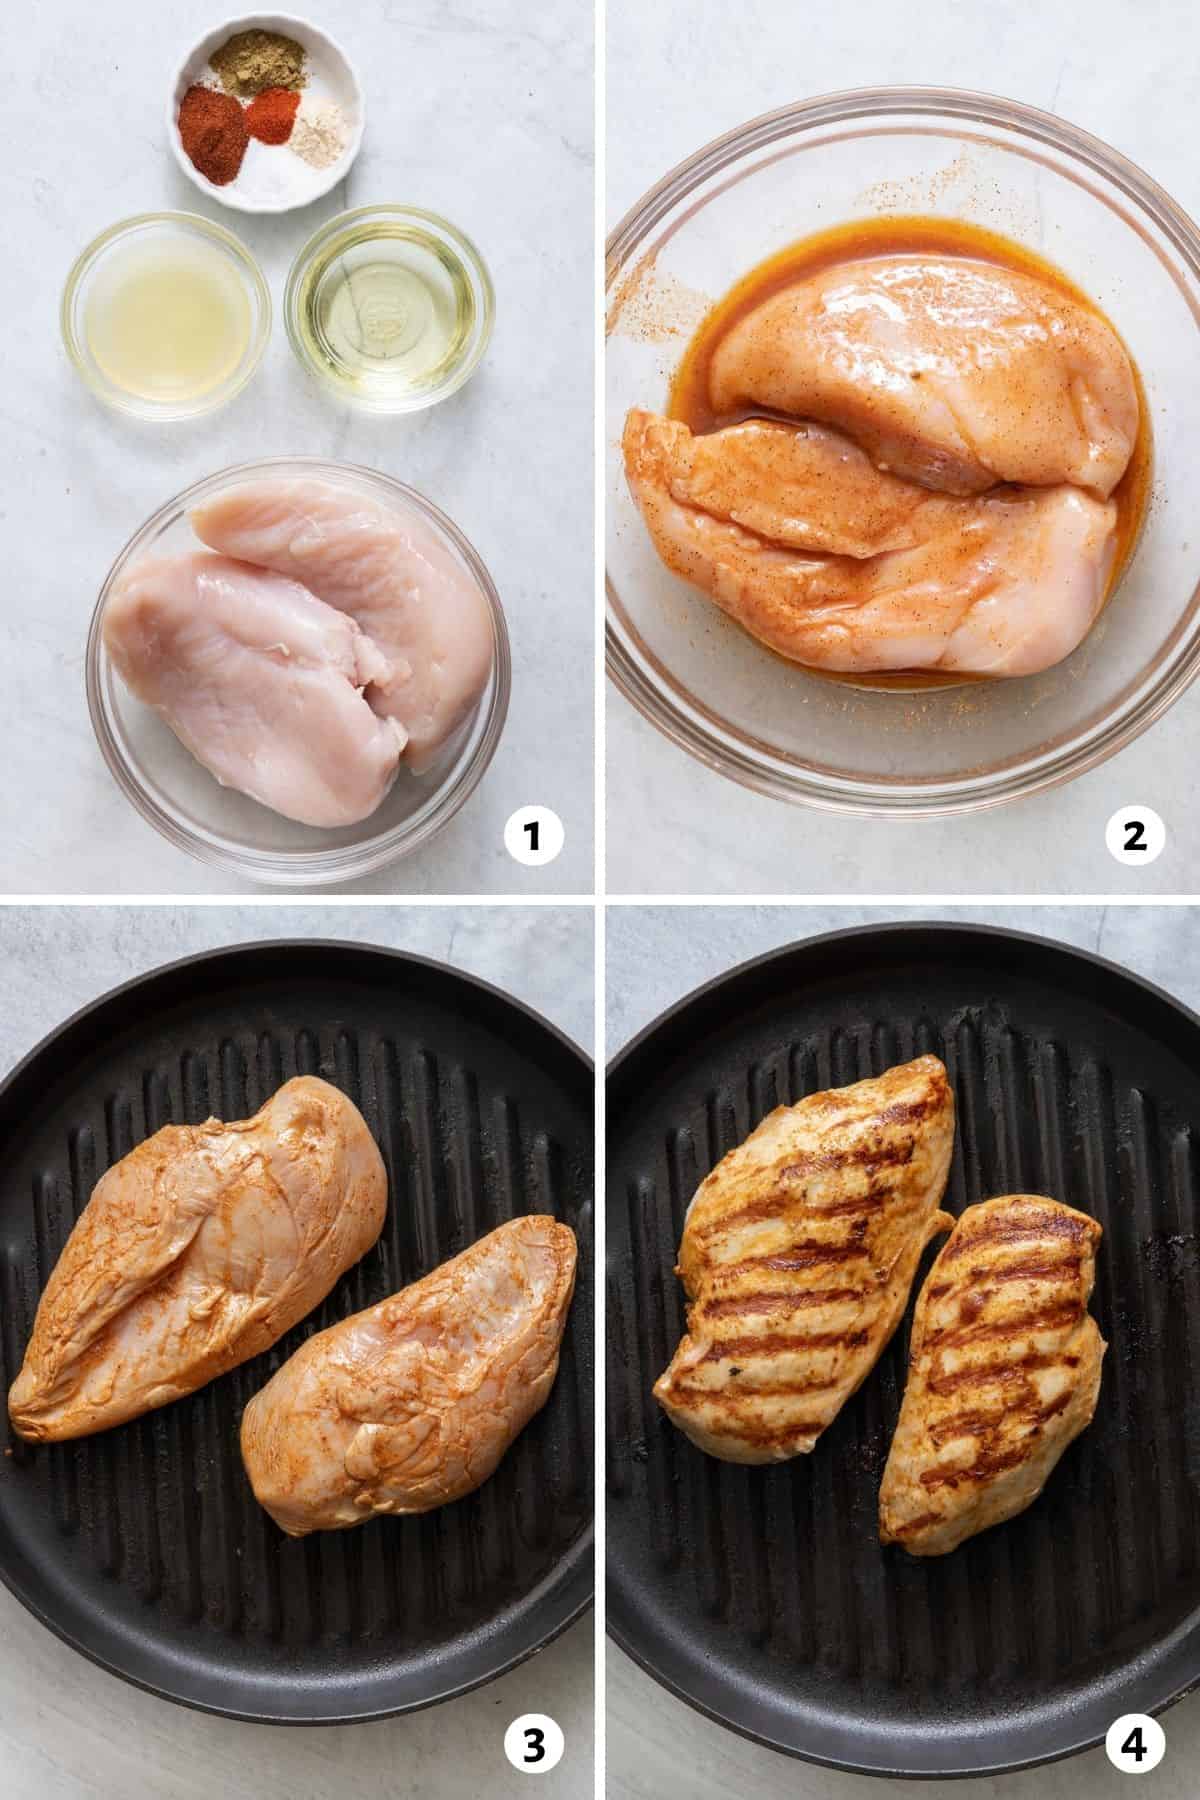 4 image collage showing ingredients for marinade, chicken breasts in bowl covering marinade, and then chicken breast on round grill pan before and after cooked.